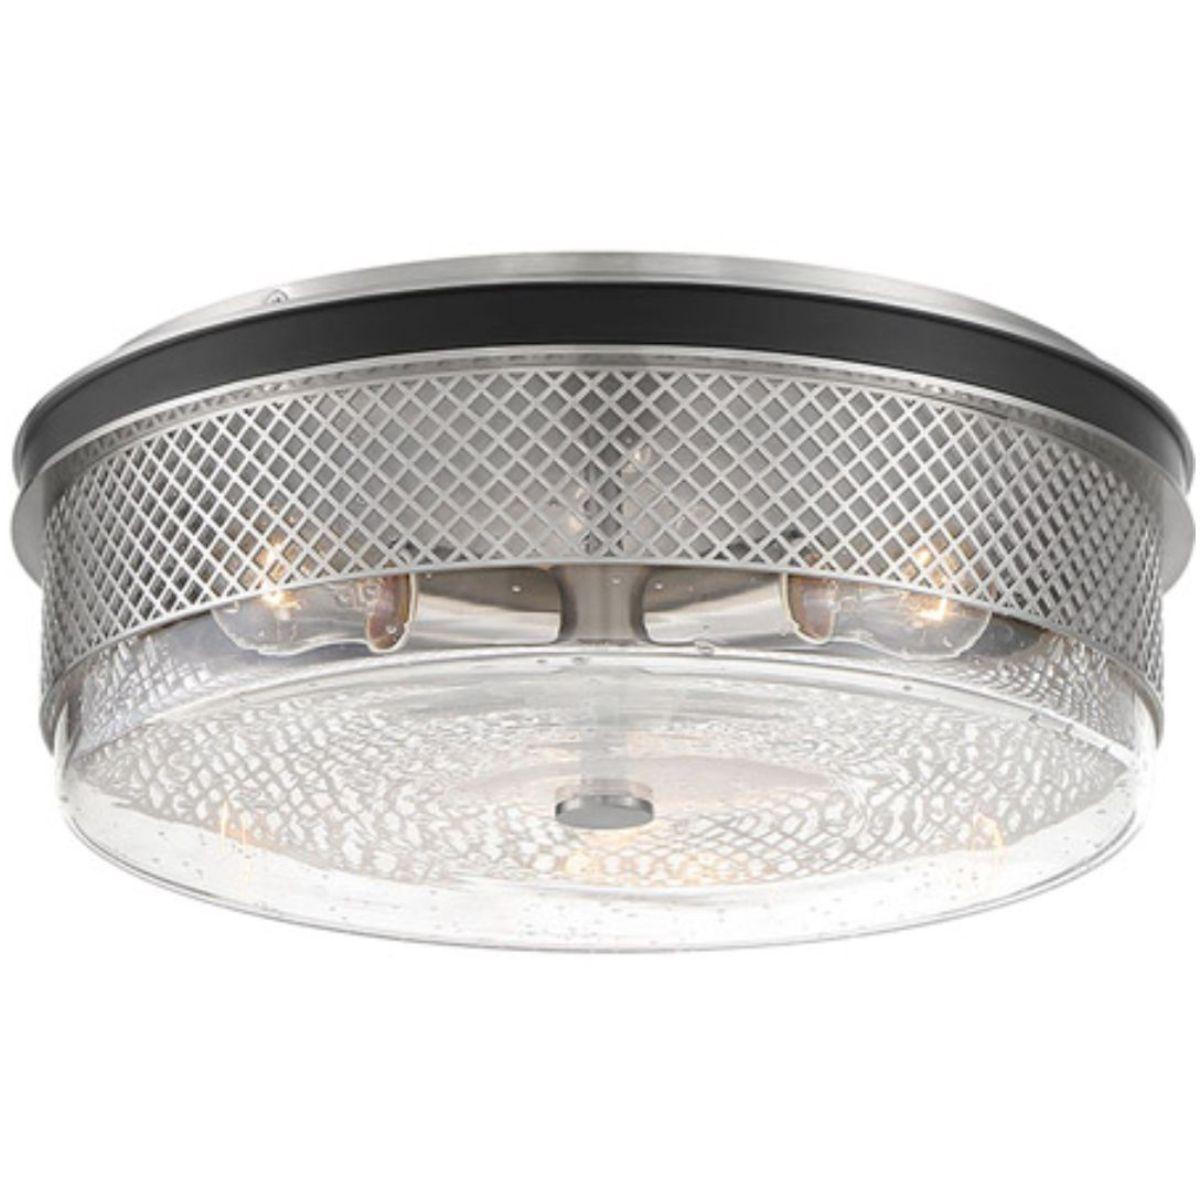 Cole's Crossing 15 in. 3 Lights Flush Mount Light Brushed Nickel Finish